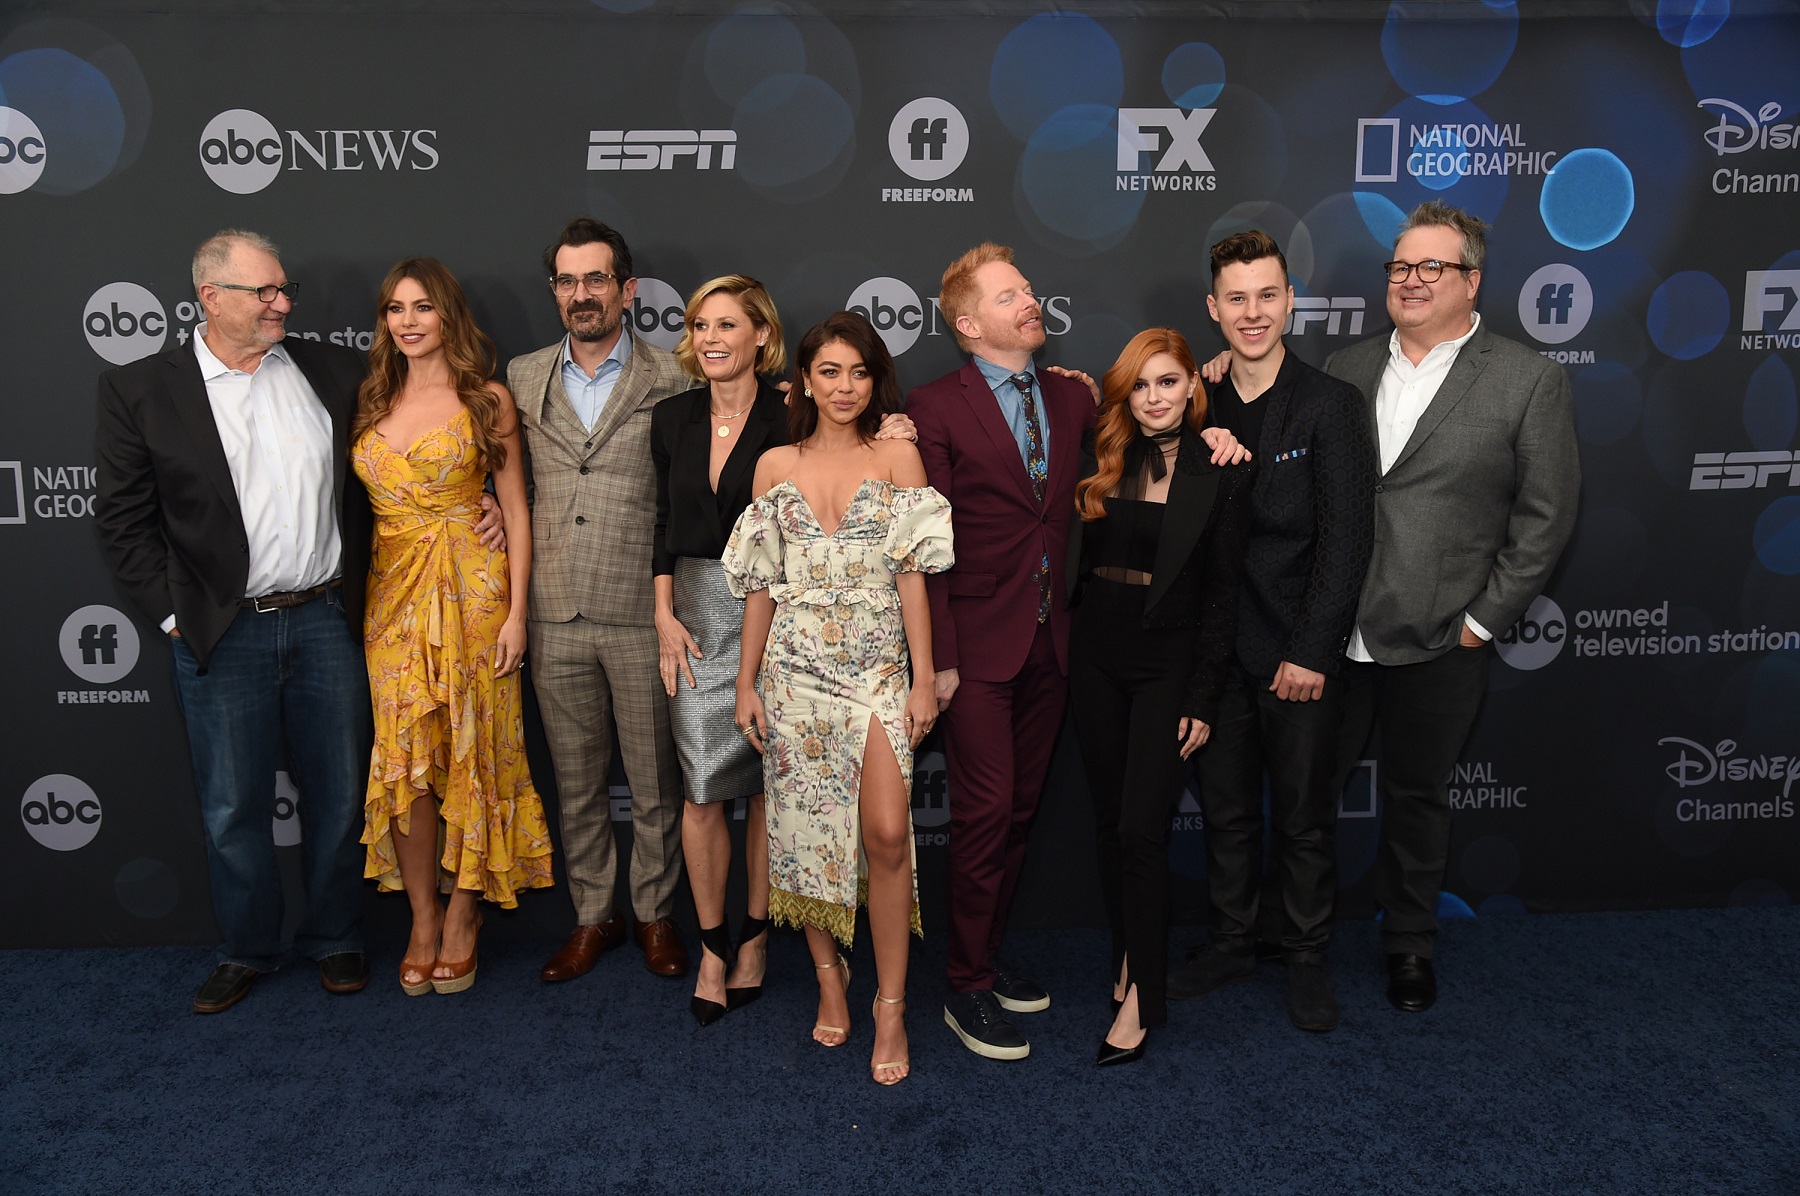 NEW YORK, NEW YORK - MAY 14: (L-R) Ed O'Neill, Sofia Vergara, Ty Burrell, Julie Bowen, Sarah Hyland, Jesse Tyler Fergussion, Ariel Winter, Nolan Gould and Eric Stonestreet attend the ABC Walt Disney Television Upfront on May 14, 2019 in New York City. (Photo by Jamie McCarthy/Getty Images)